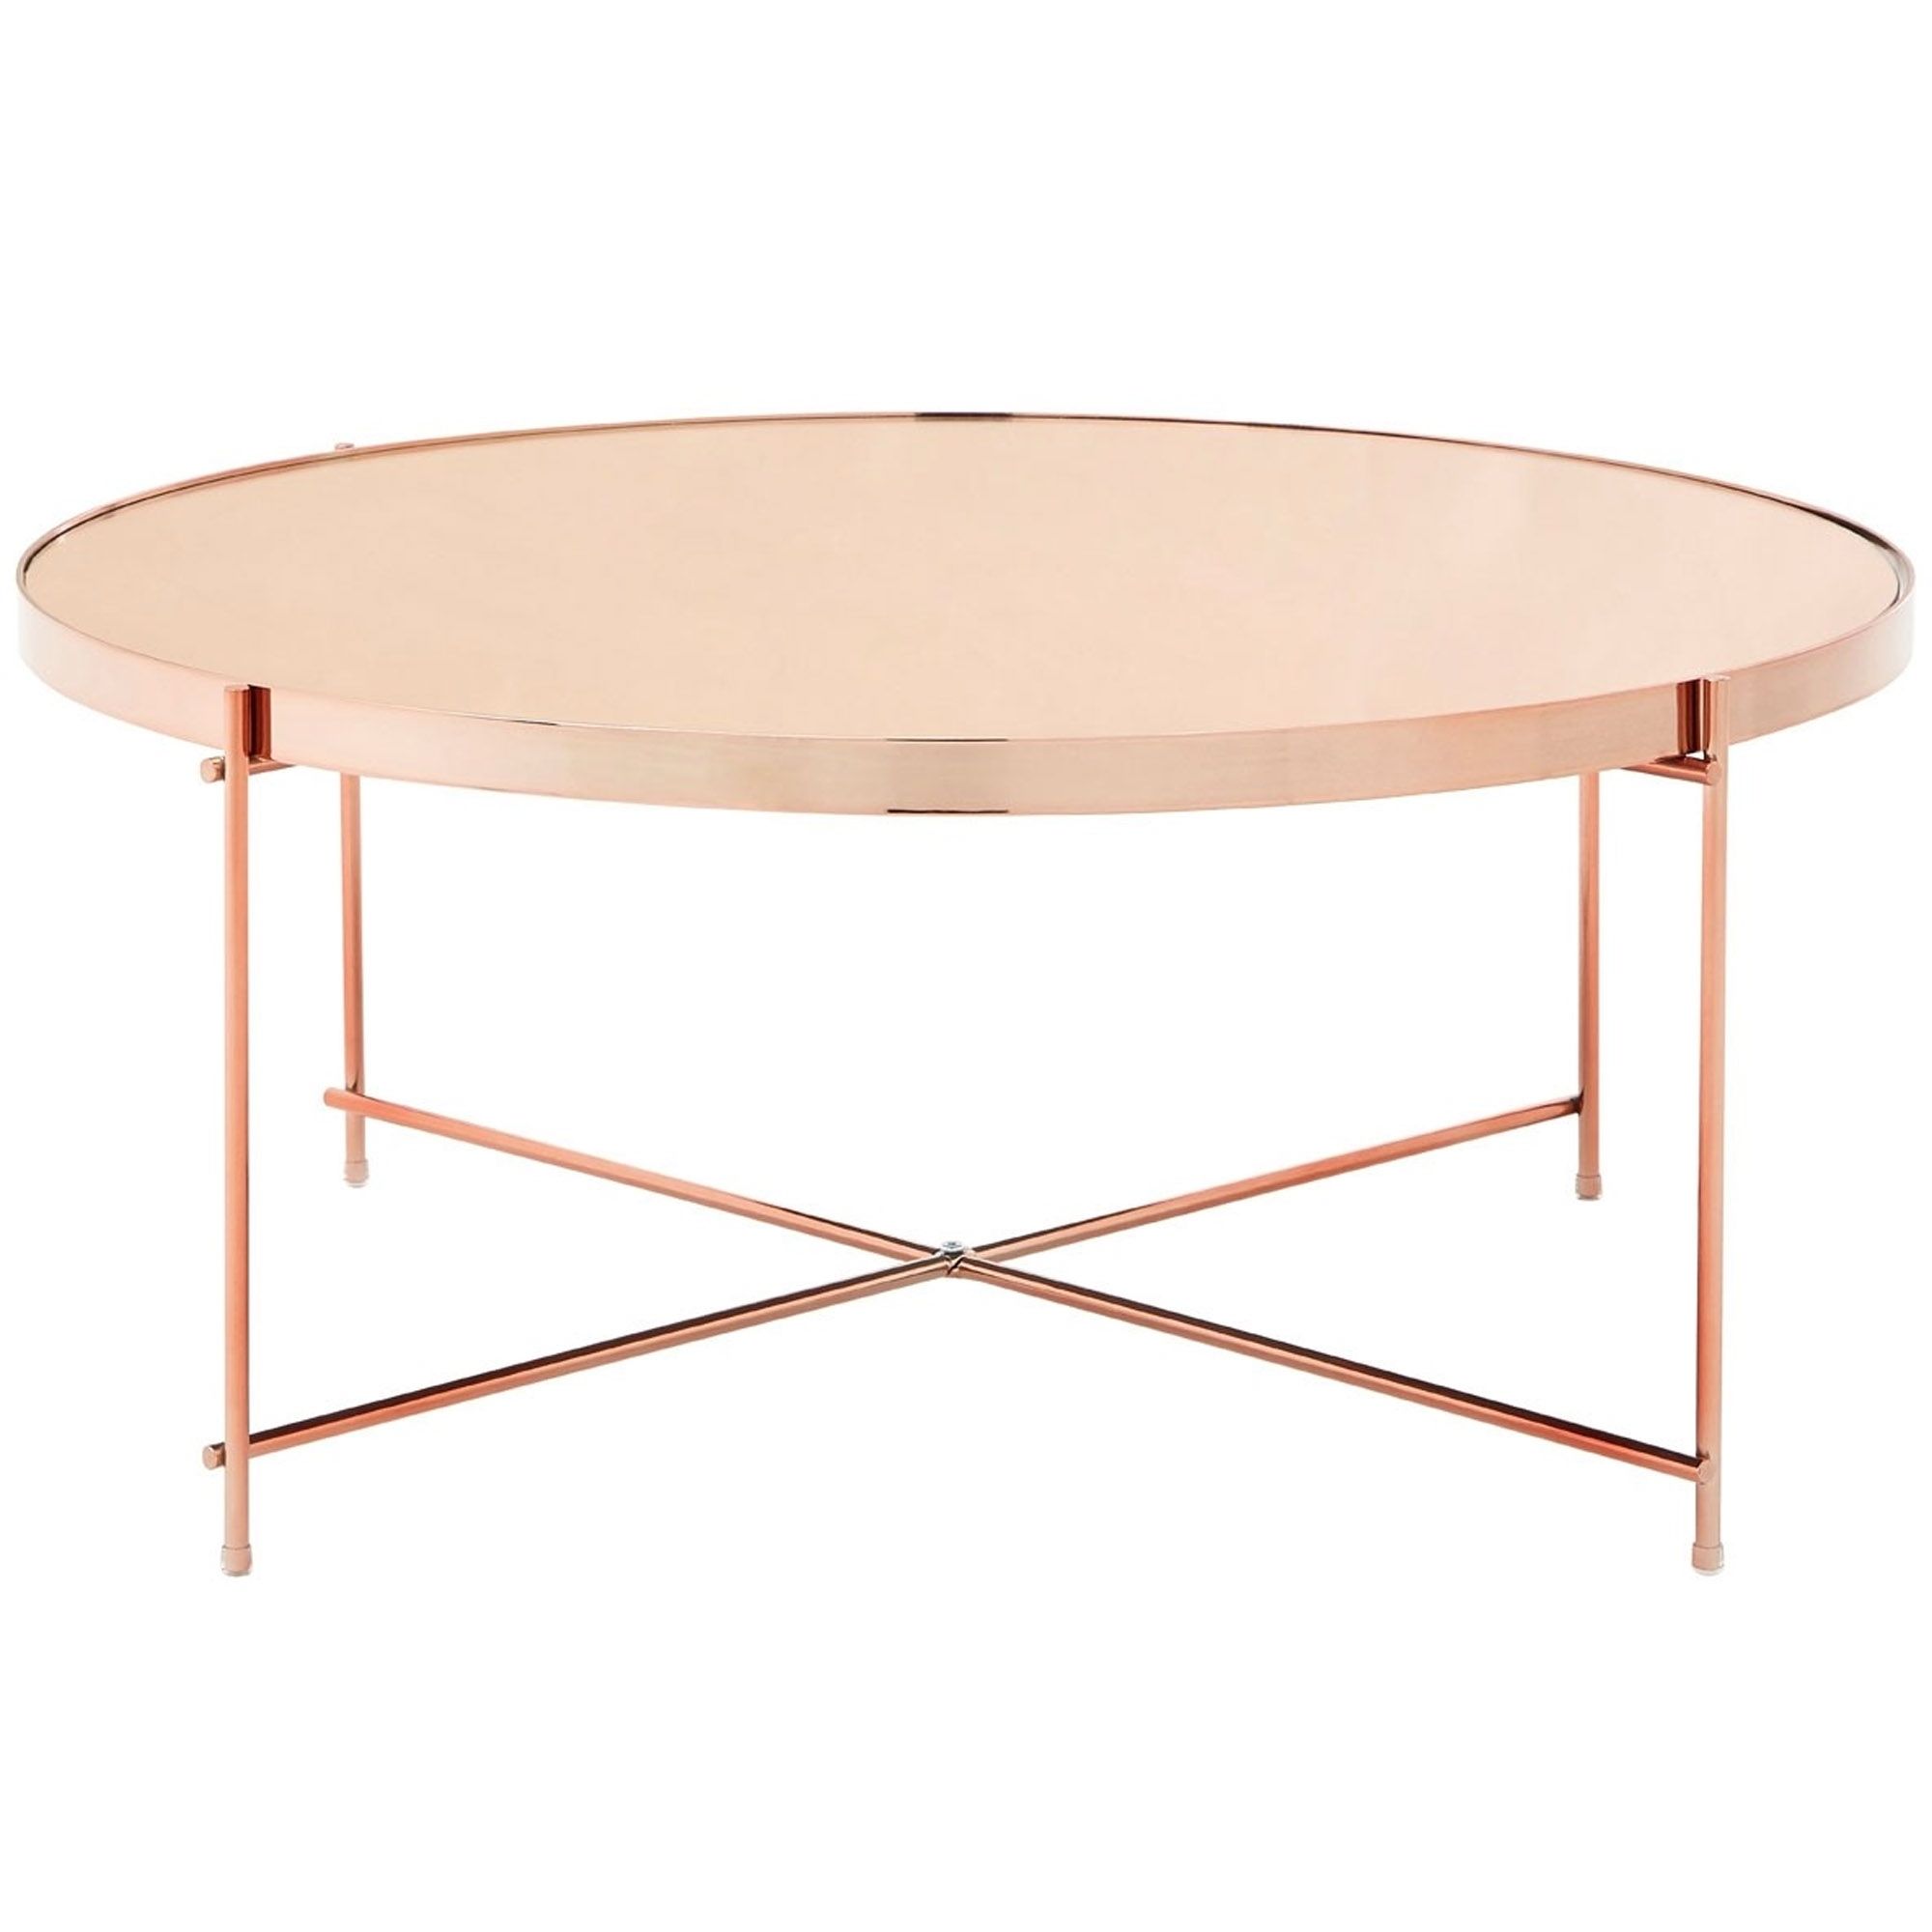 Rose Gold Round Allure Coffee Table | Contemporary Lounge Furniture Regarding Rose Gold Coffee Tables (View 5 of 20)